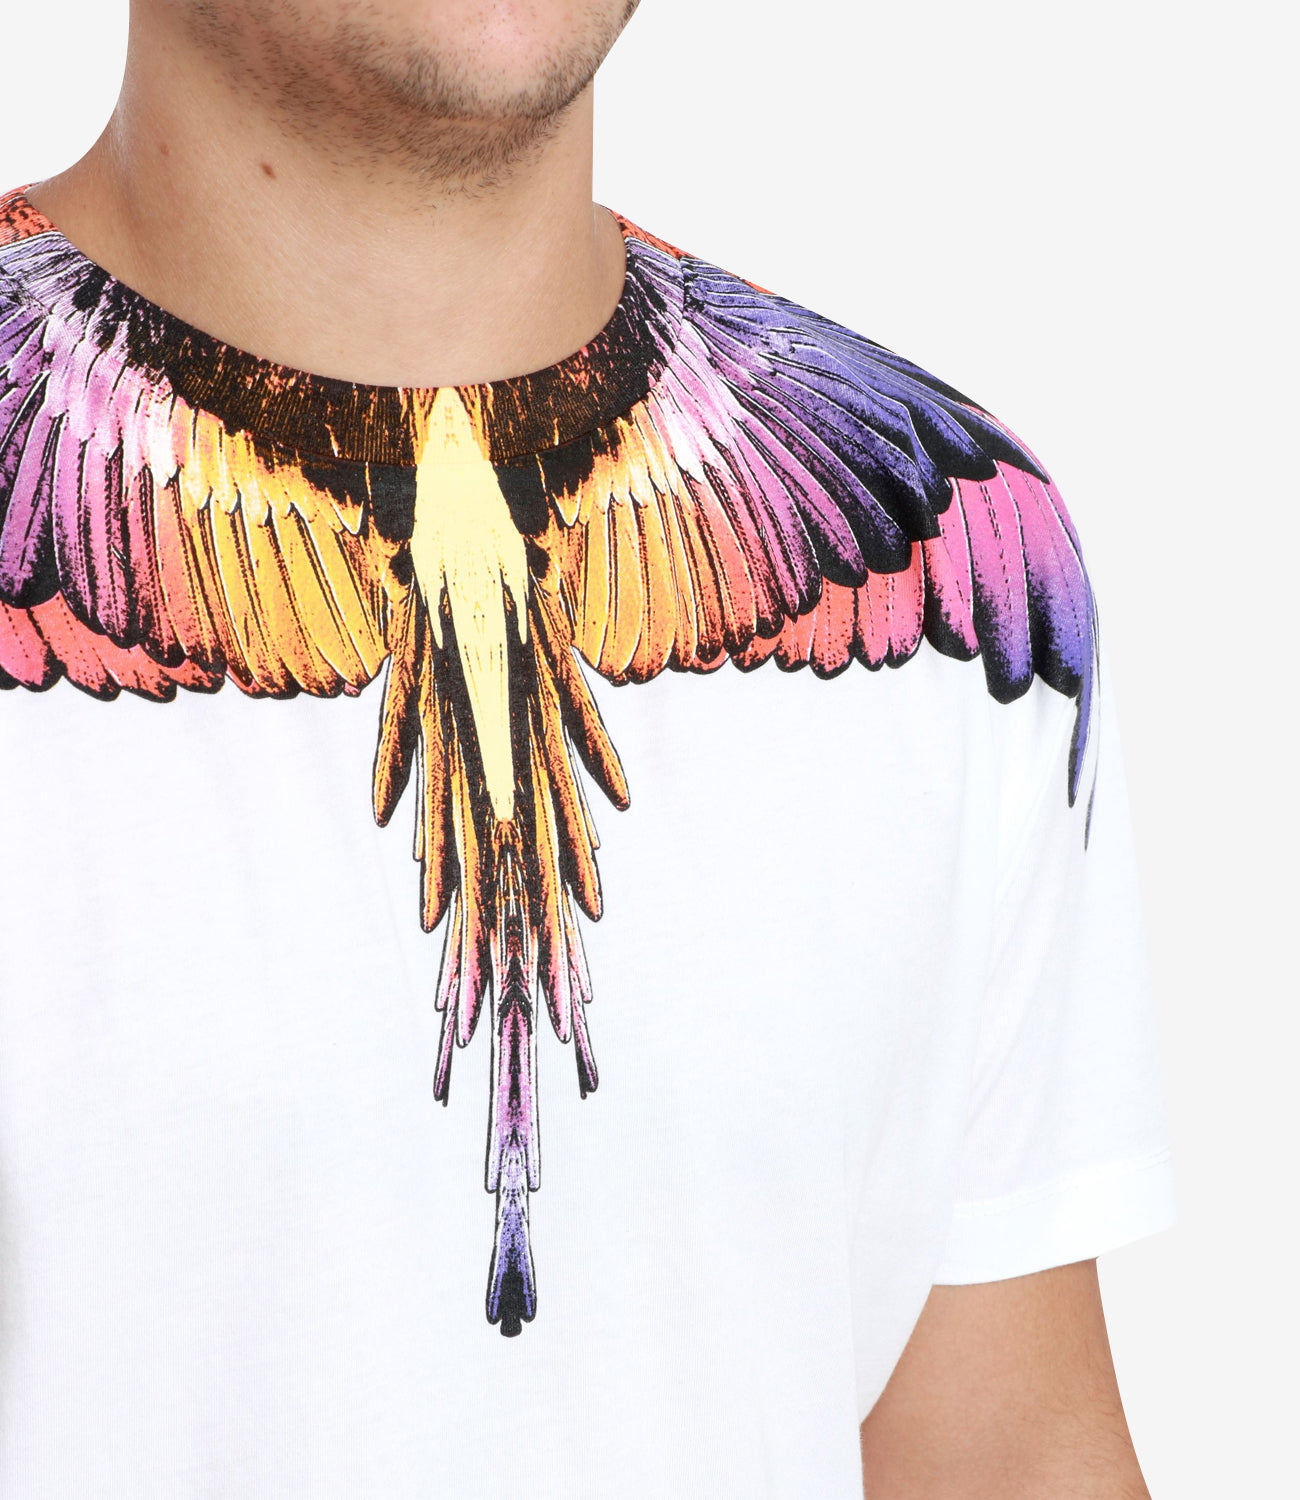 Marcelo Burlon | T-Shirt Icon Wings White and Pink